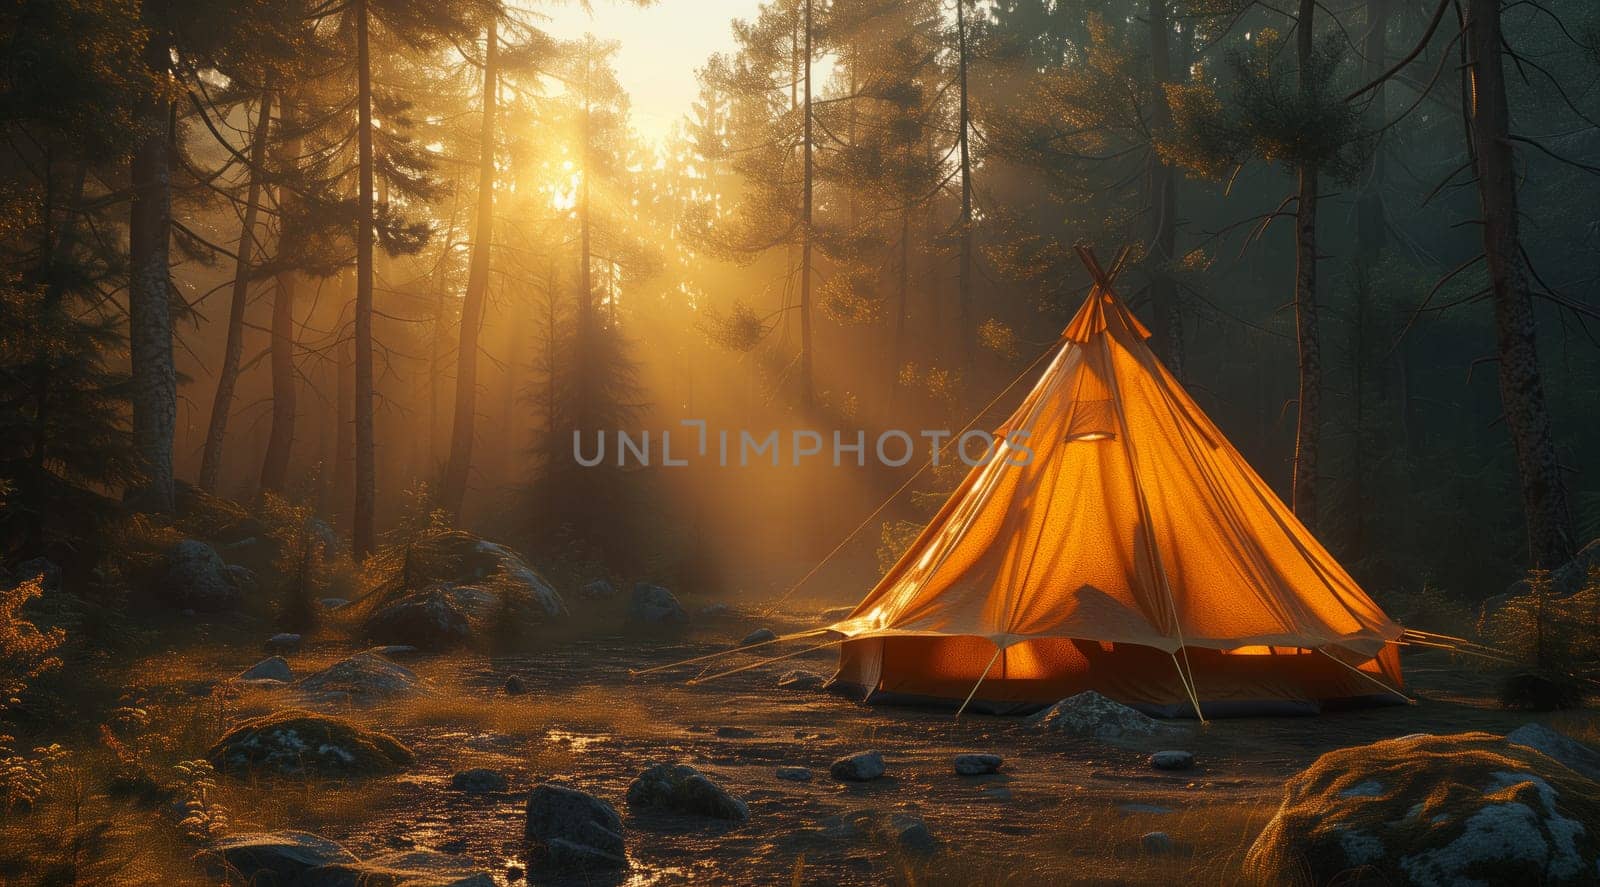 a tent is sitting in the middle of a forest with the sun shining through the trees by richwolf